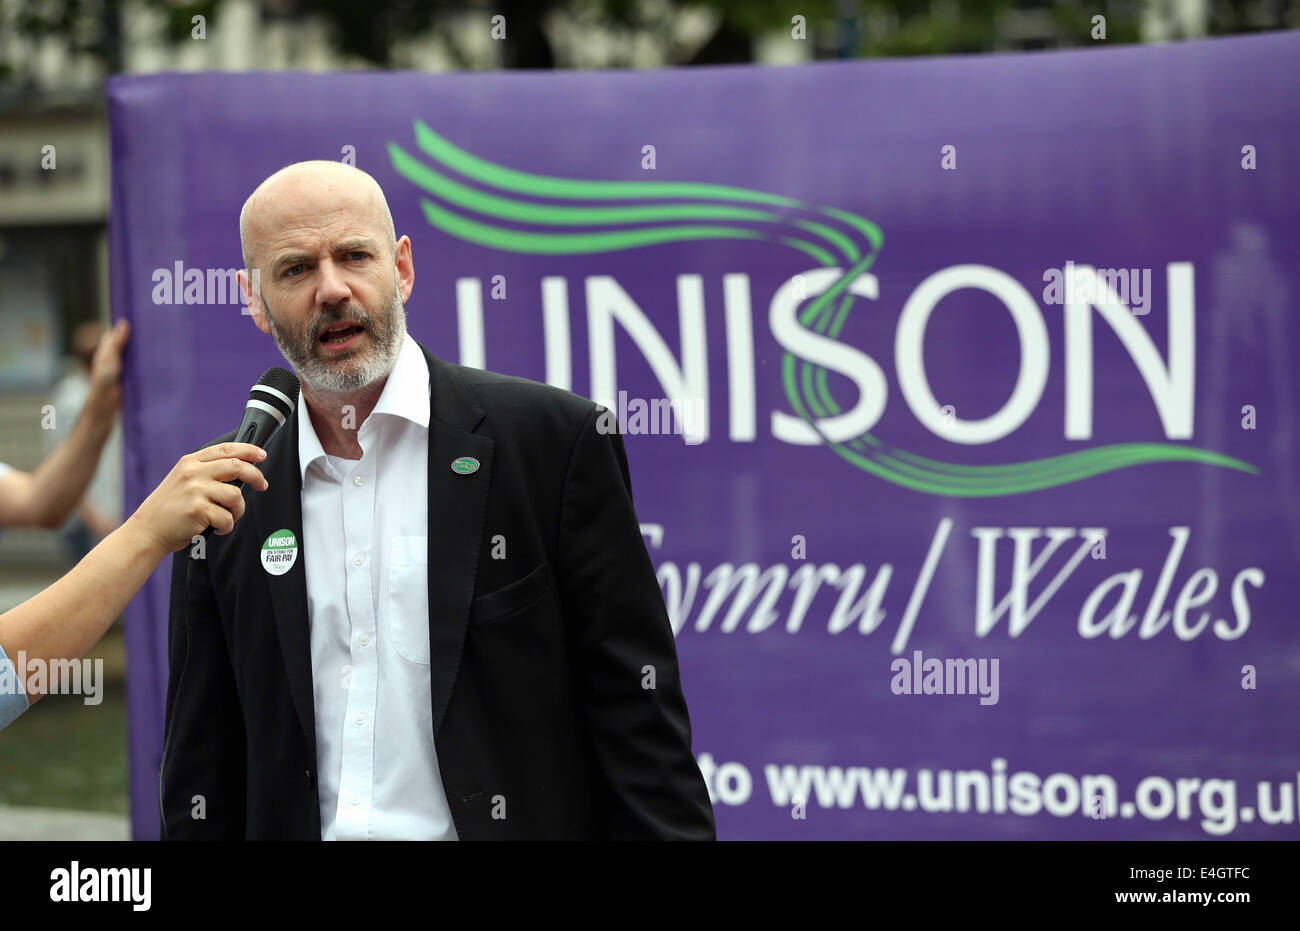 Swansea, UK. 10th July, 2014.  Pictured: Dominic MacAskill of Unison speaking at Castle Square Gardens, Swansea, south Wales.  Re: Strikes are taking place across the UK in a series of disputes with the government over pay, pensions and cuts, with more than a million public sector workers expected to join the action.  Firefighters, librarians and council staff are among those taking part from several trade unions, with rallies taking place across the UK. Credit:  D Legakis/Alamy Live News Stock Photo